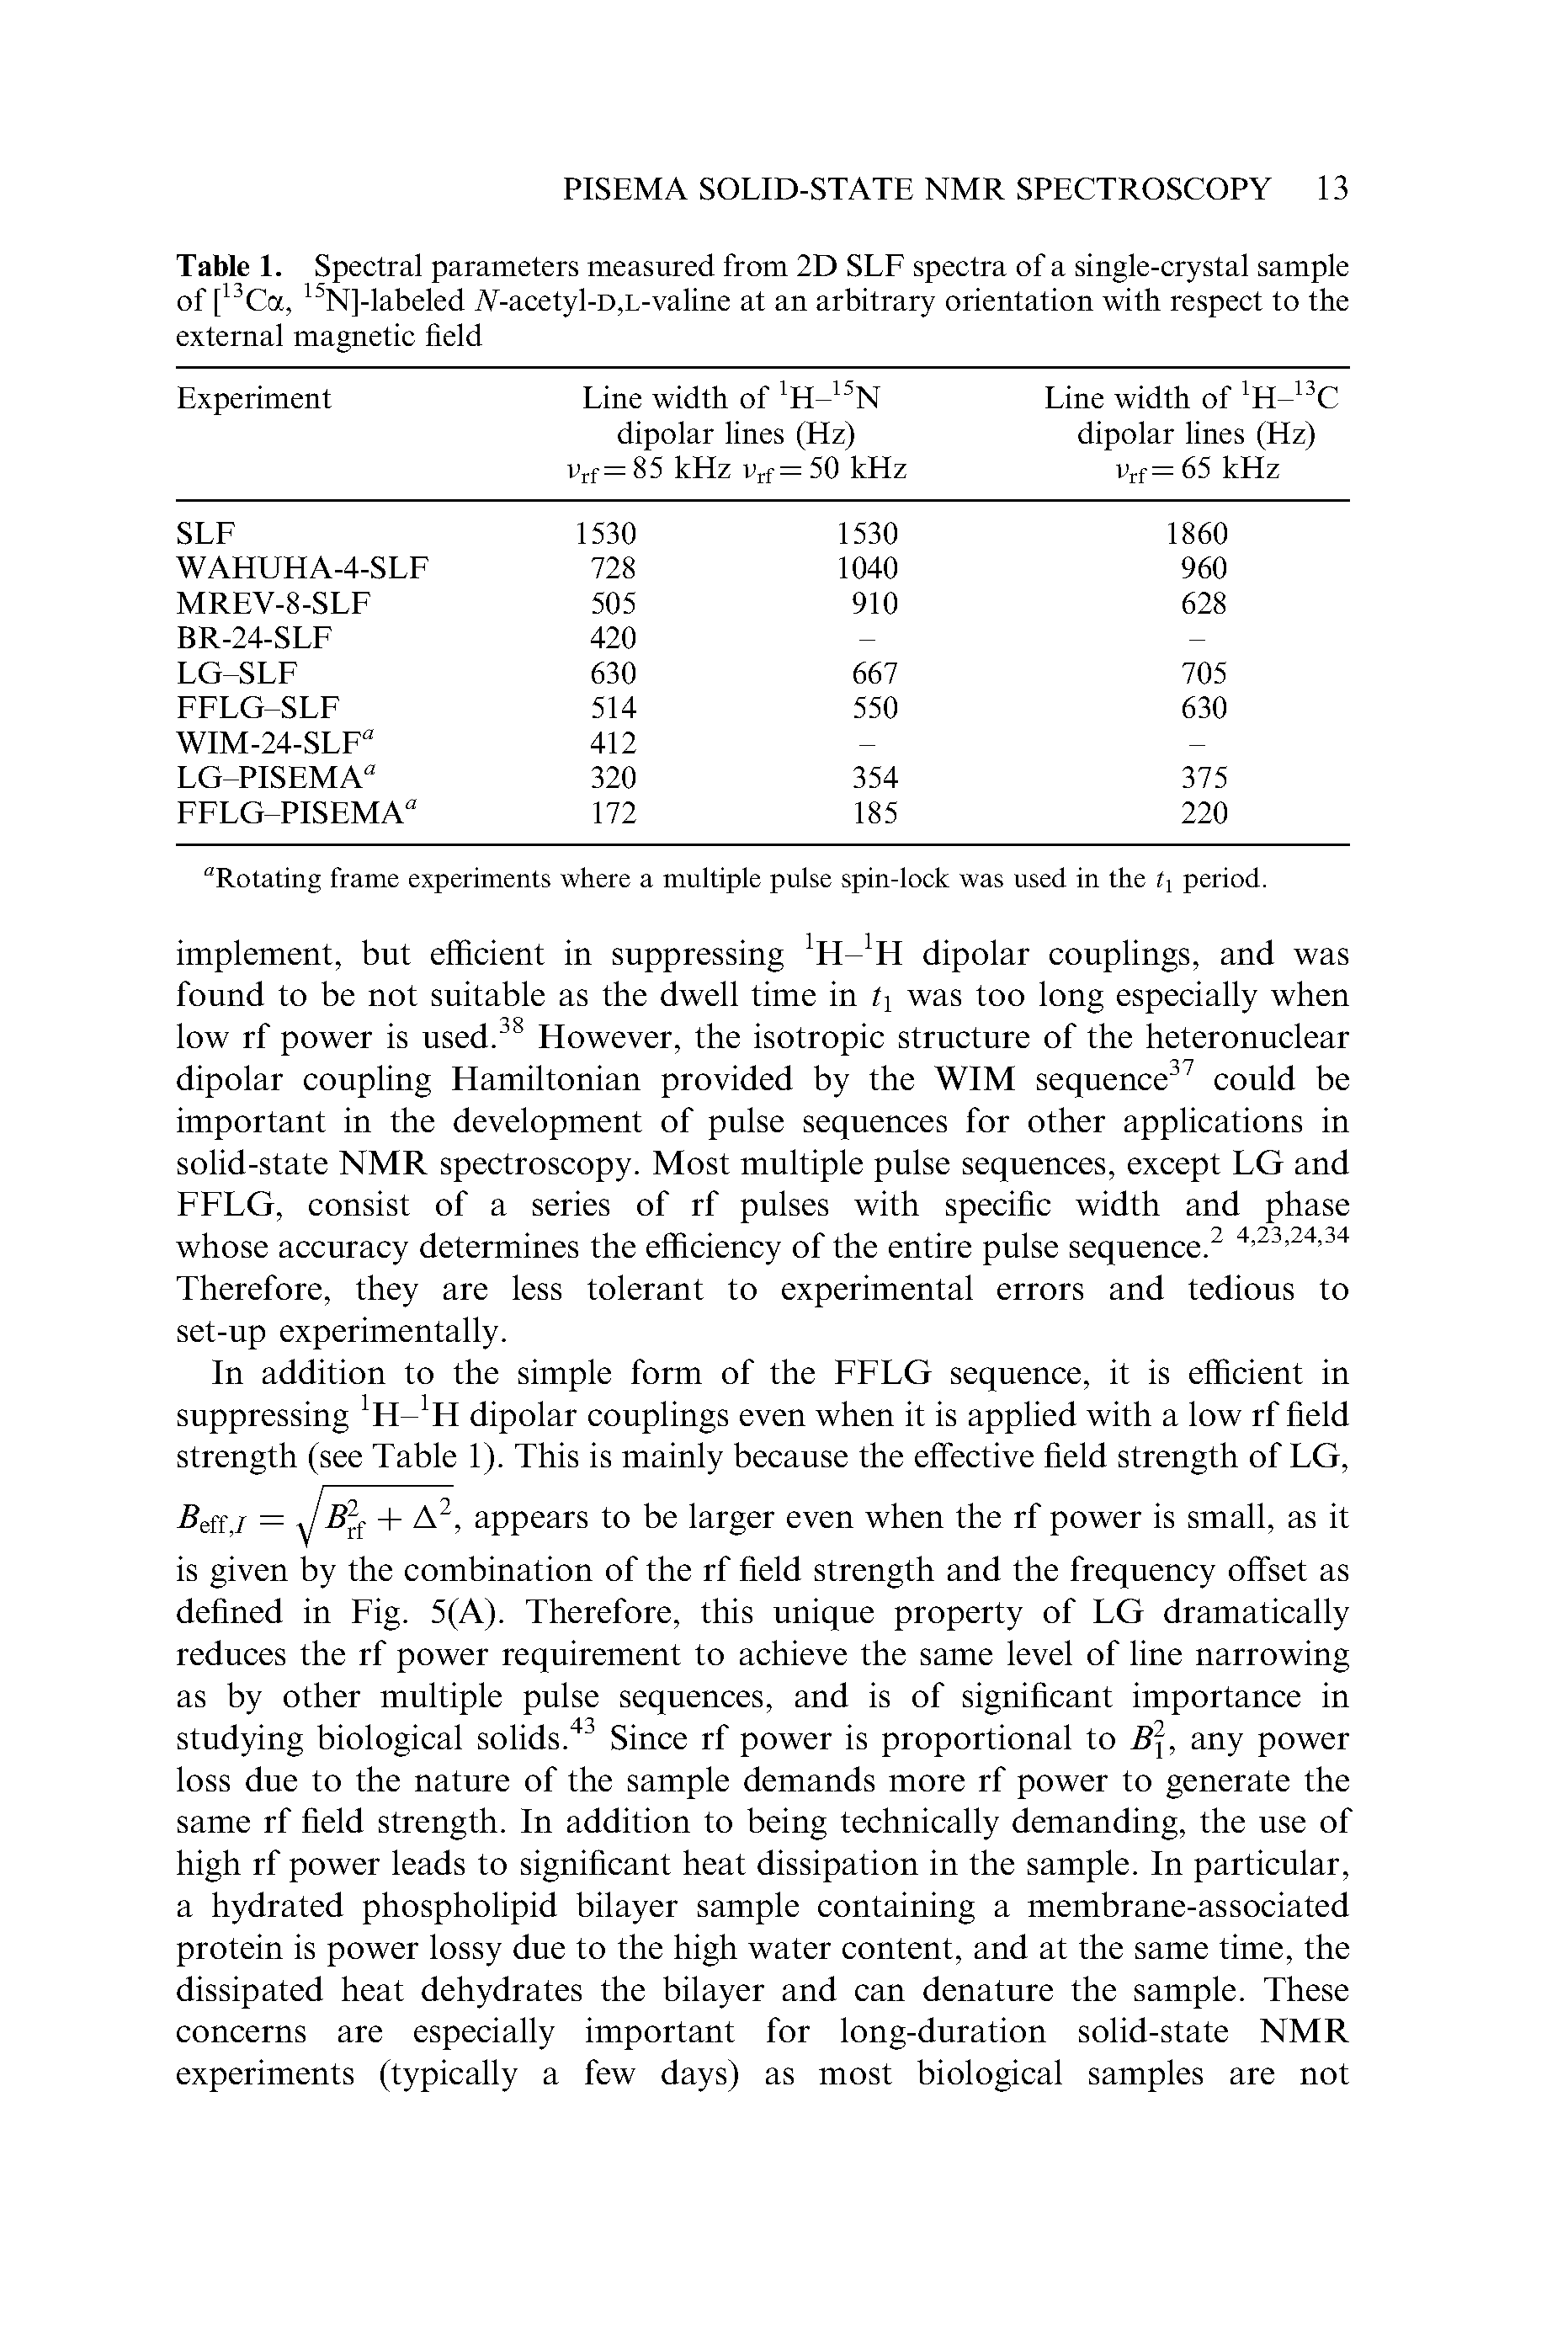 Table 1. Spectral parameters measured from 2D SEE spectra of a single-crystal sample of [ Ca, Nl-labeled A -acctyl-i),i -valinc at an arbitrary orientation with respect to the external magnetic field...